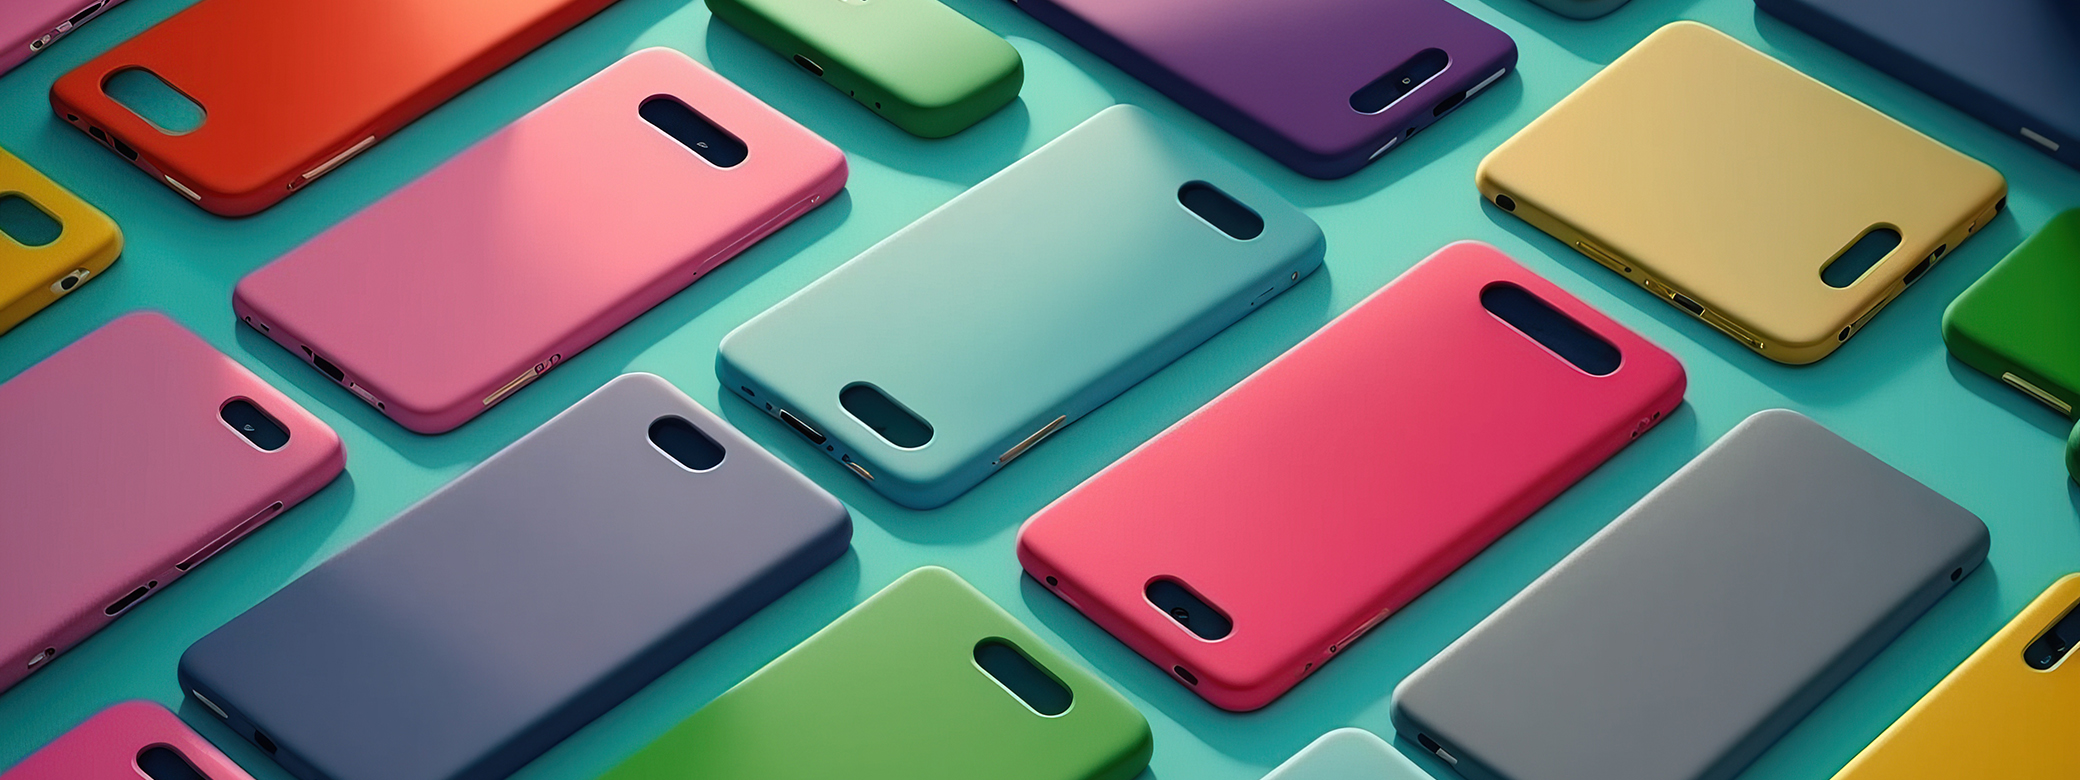 A row of colorful cellphone covers